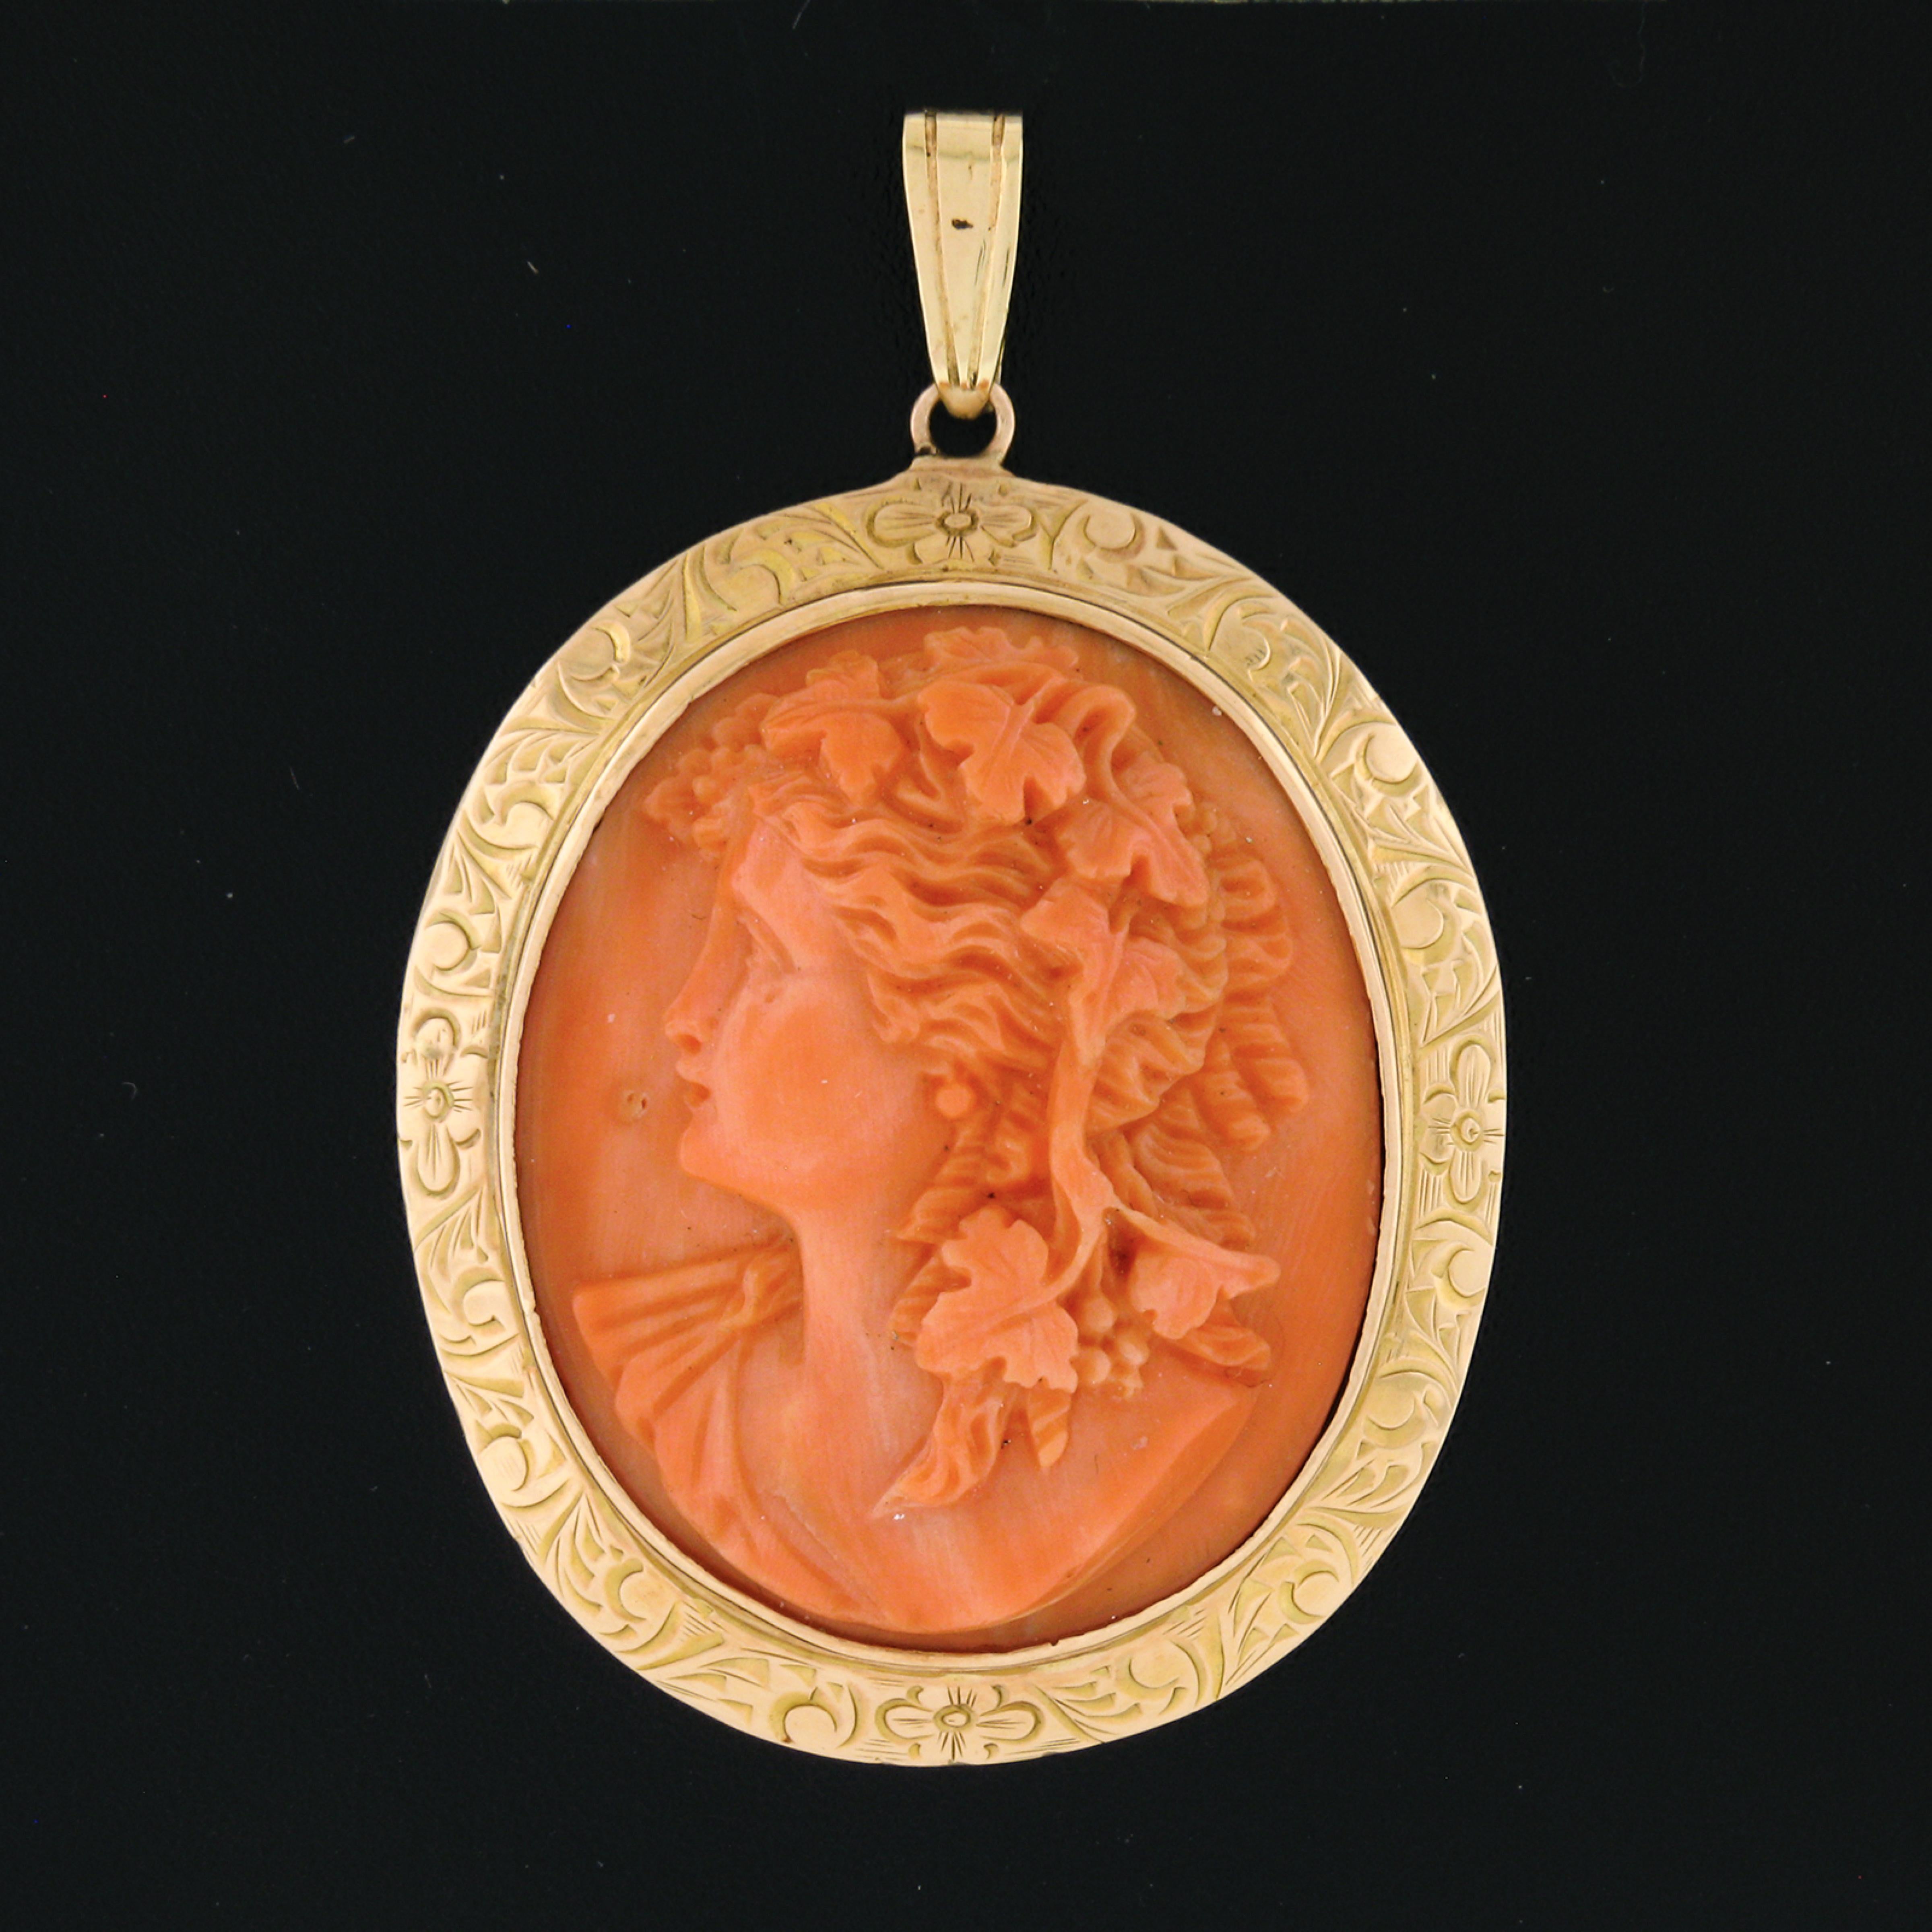 Here we have an outstanding vintage pendant that was crafted from solid 14k yellow gold. It features a large and magnificent piece of natural coral that is bezel set at its center with a gorgeous and rich salmon pink color, and has been masterfully